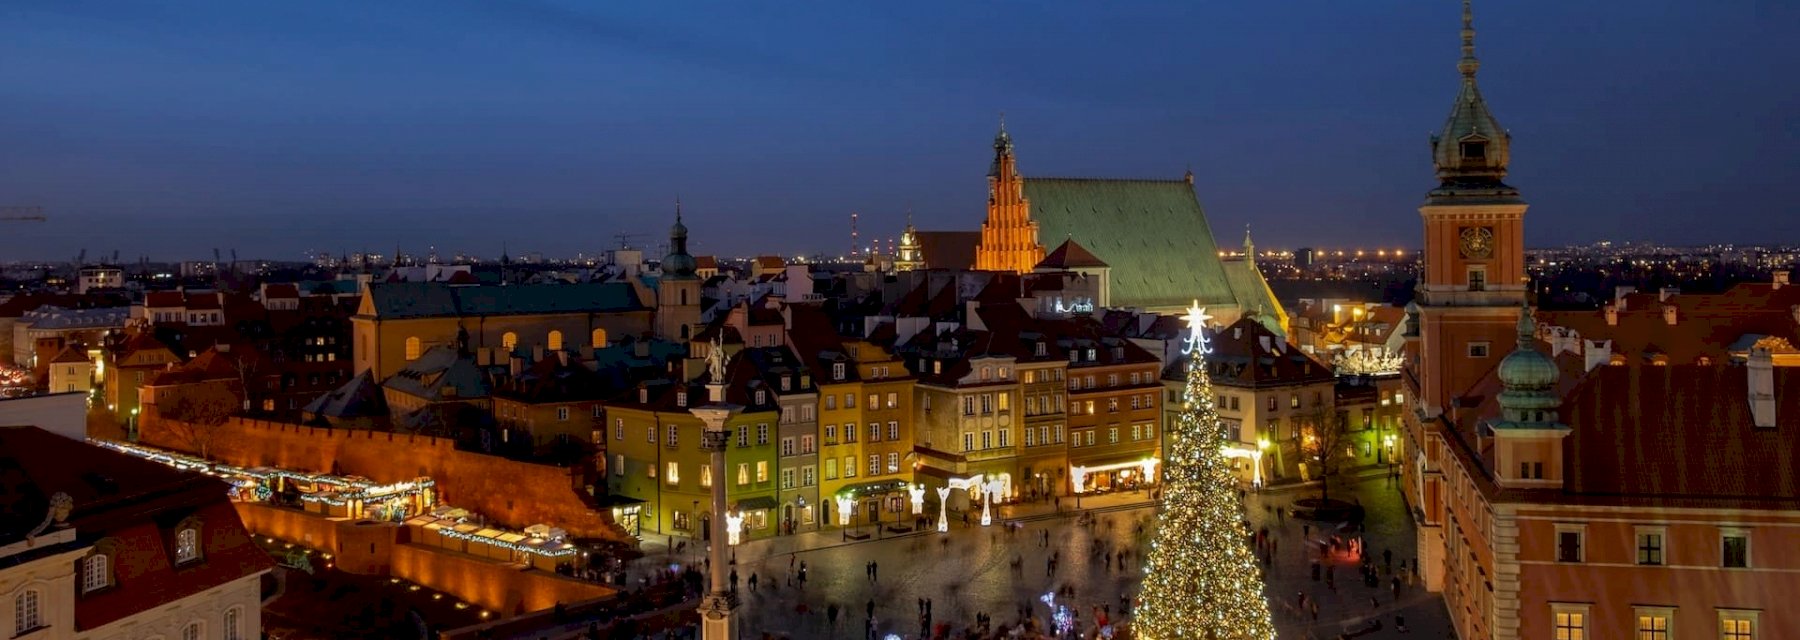 A personal Story: My first Christmas eve in Poland